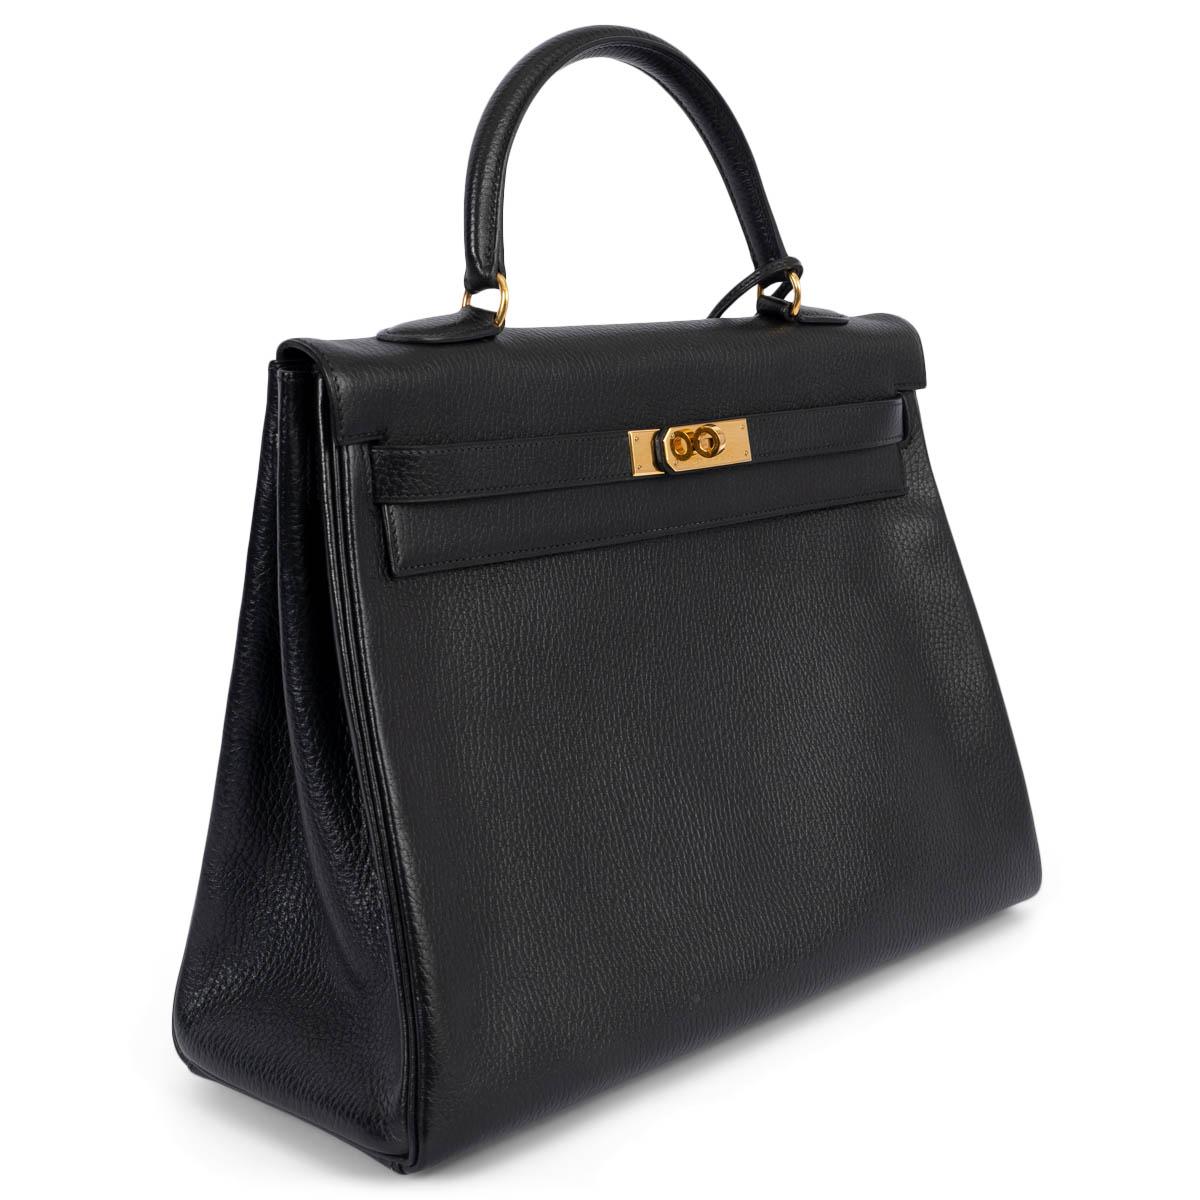 100% authentic Hermès Kelly 35 Retourne bag in black Vache Grainee leather featuring gold-tone hardware. Lined in Chevre (goat skin) with two open pockets against the front and a zipper pocket against the back. Comes with leather shoulder-strap. Has